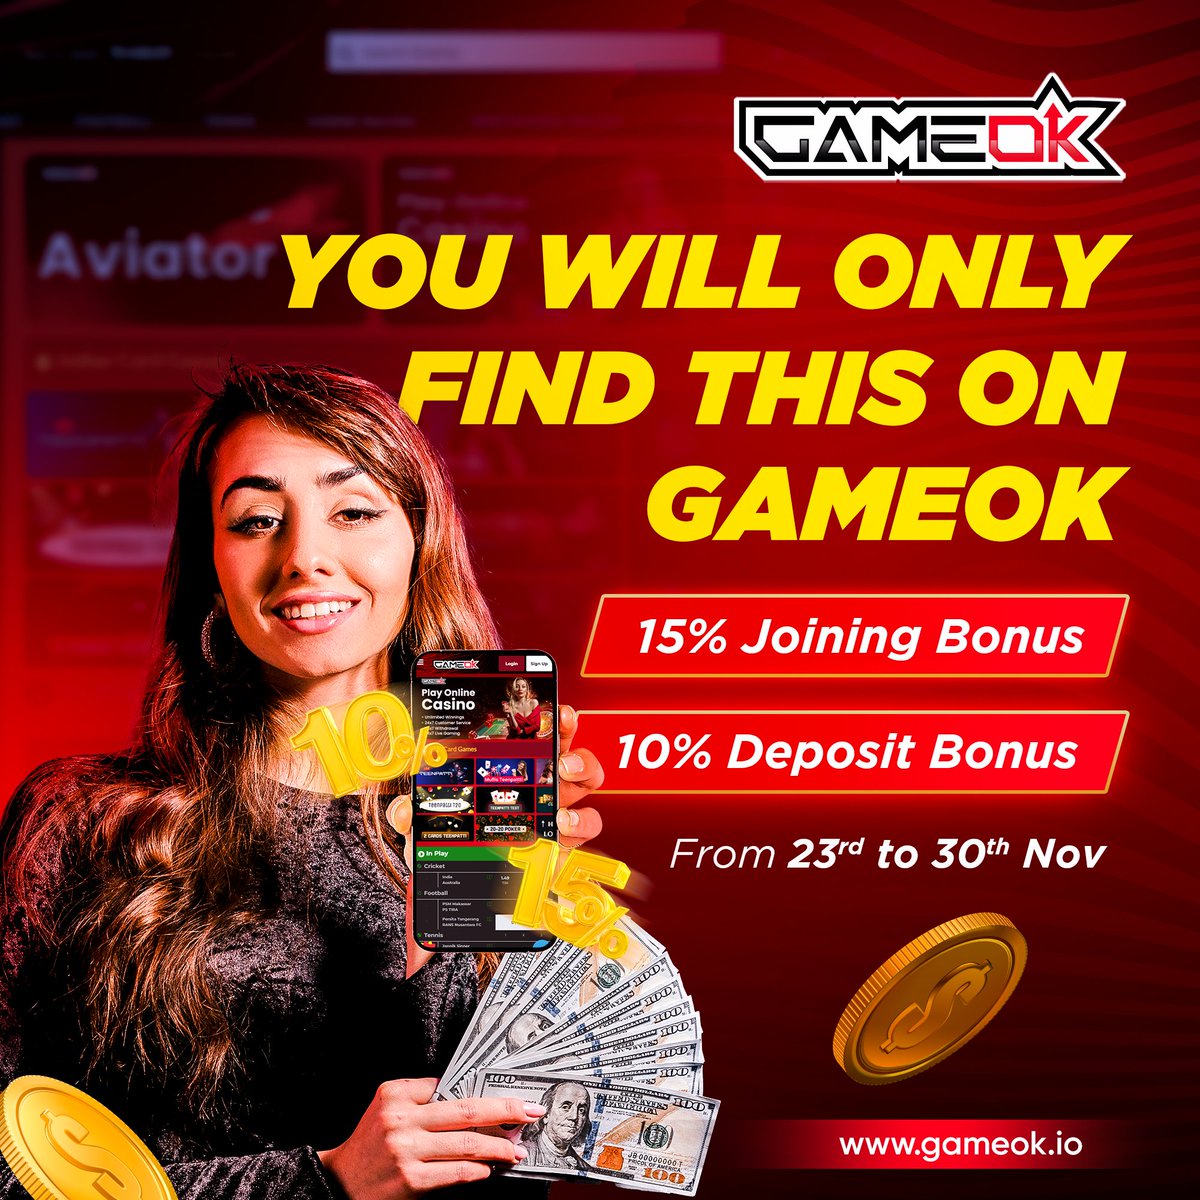 Don't miss this limited time Offer!

🎮 Play Online Now! (Link in Bio)

🎁 Sign Up Bonus
💰 Deposit Bonus
🌟 Unlimited Winnings
🌐 Premium Websites
🔴 Live Gaming
💸 24/7 Withdrawals
📢 24/7 Live Gaming
👩‍💼 Live Dealers
🪙 BFIC Accepted Here!

#GameOK #BLoveGames #BFIC #GameFi…